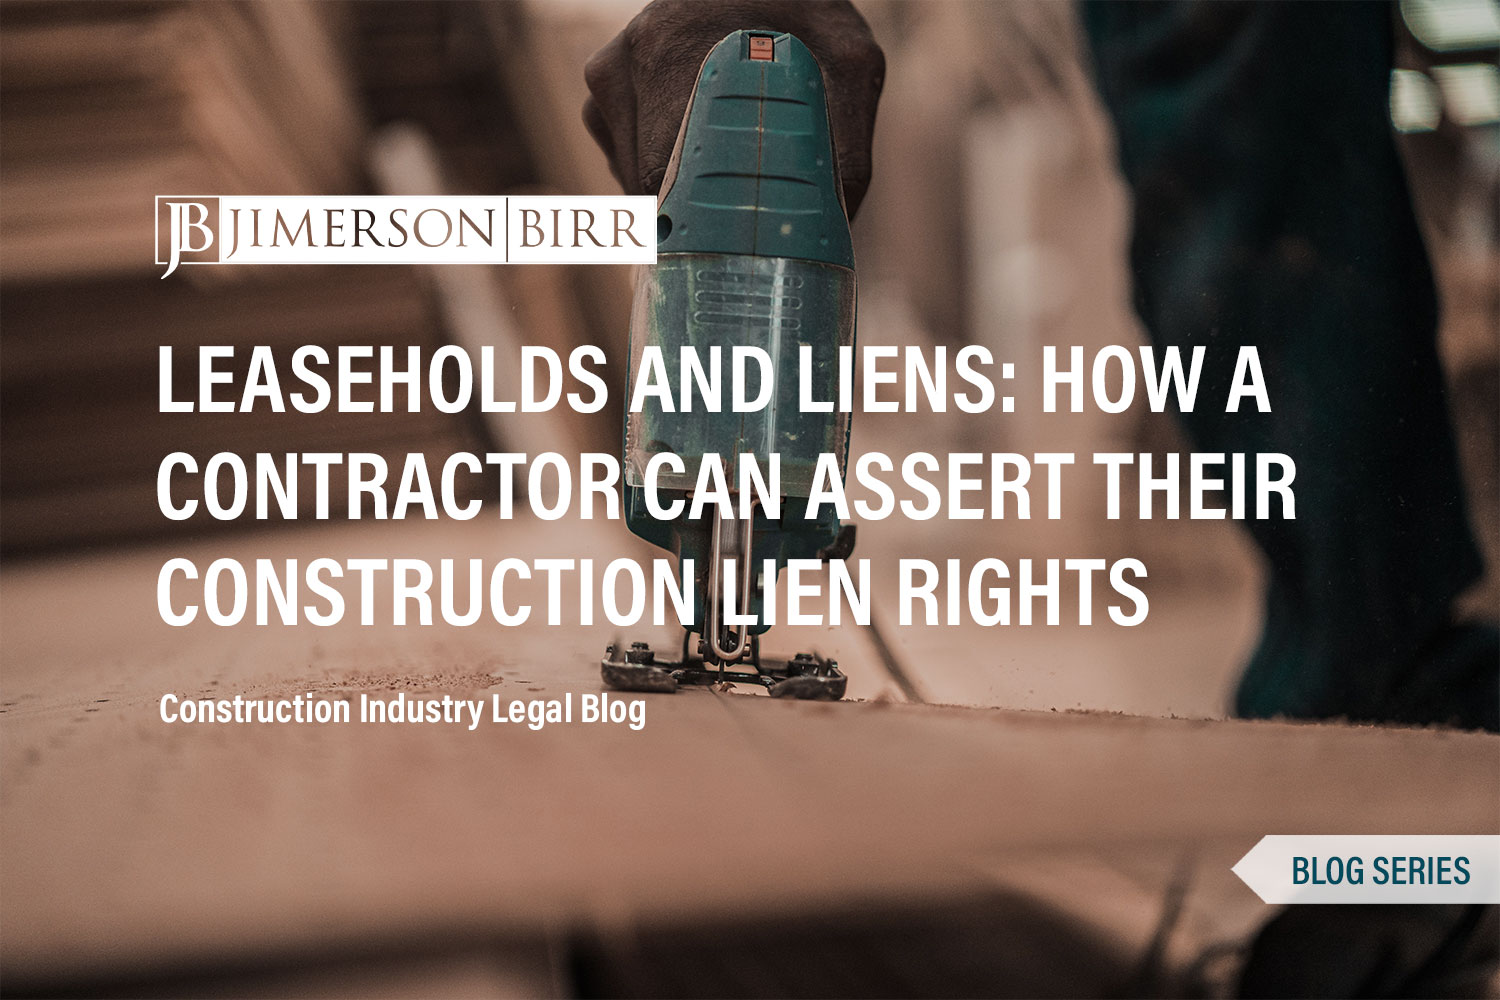 How Contractors Can Protect Their Lien Rights When Working on Leased Property